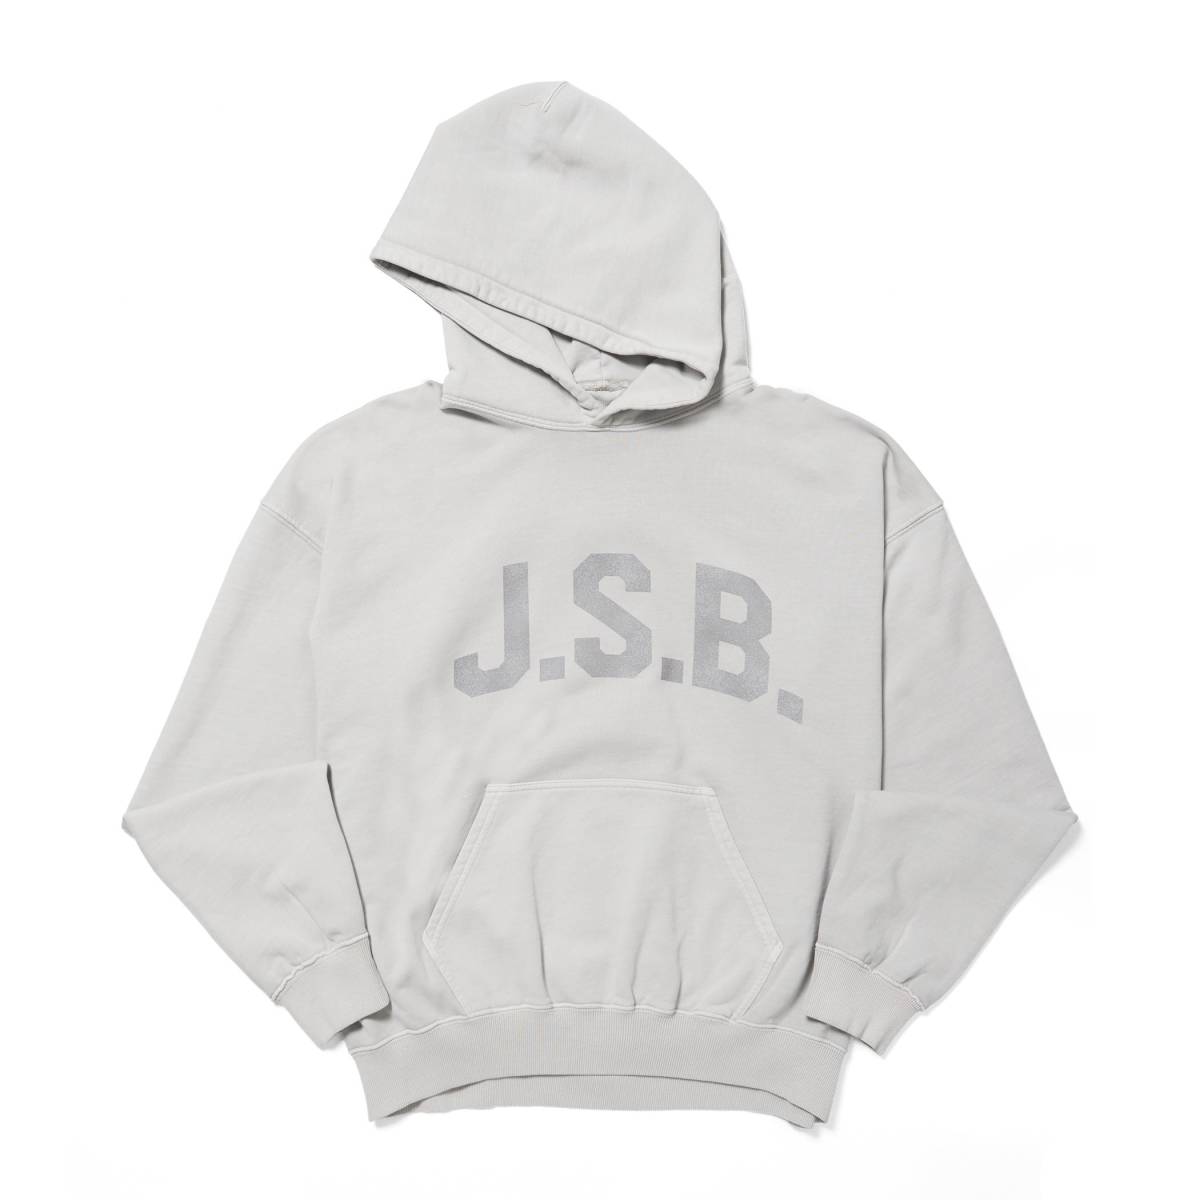 Sサイズ★三代目 J SOUL BROTHERS ■Dropped Overdye Hoodie スエットパーカ/岩田剛典 登坂広臣 今市隆二 山下健二郎 NAOTO ELLY 小林直己_画像4